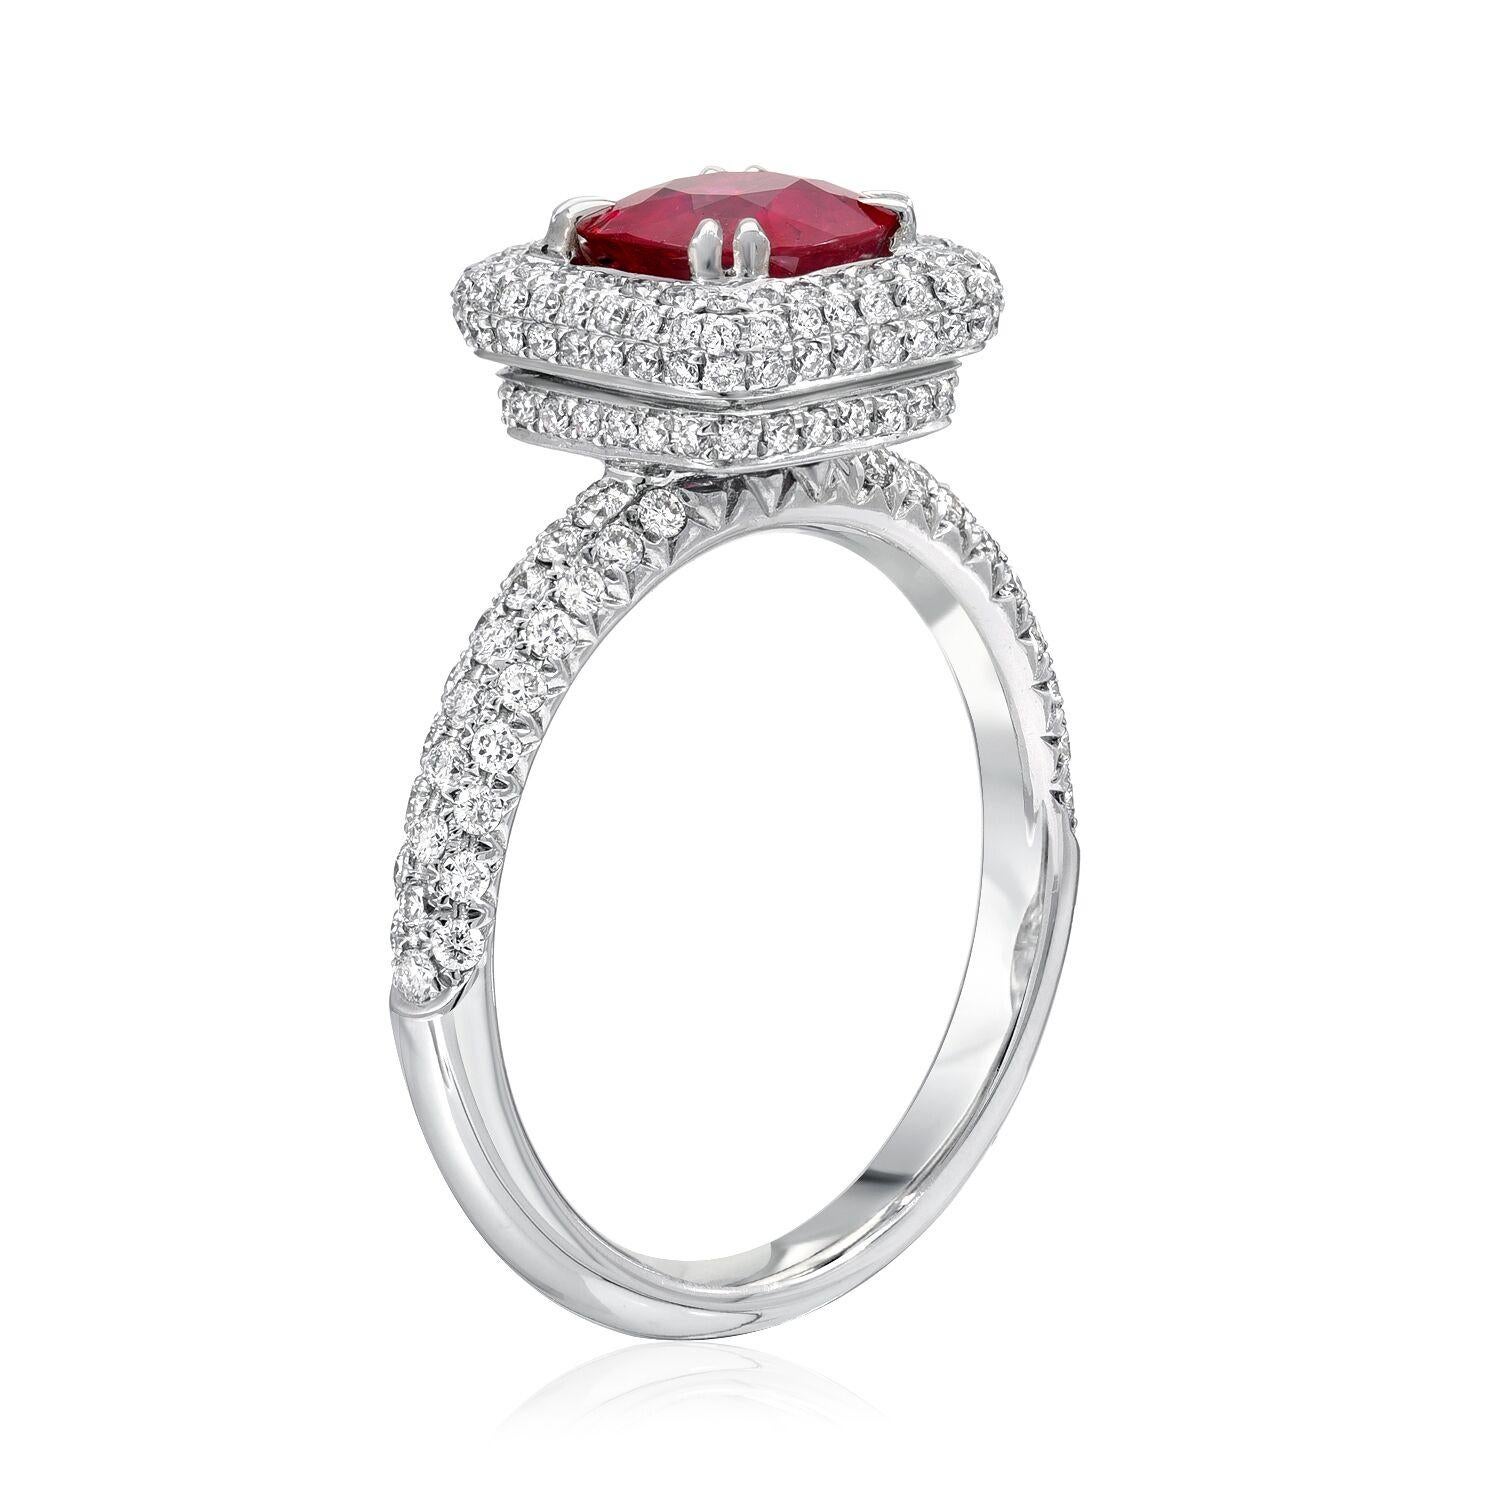 Burmese Ruby cushion cut weighing a total of 1.28 carats is set in this marvelous 0.77 carat total, micro pave diamond, 18K white gold engagement ring or cocktail ring. 
Size 7. Re-sizing is complimentary upon request.
Returns are accepted and paid